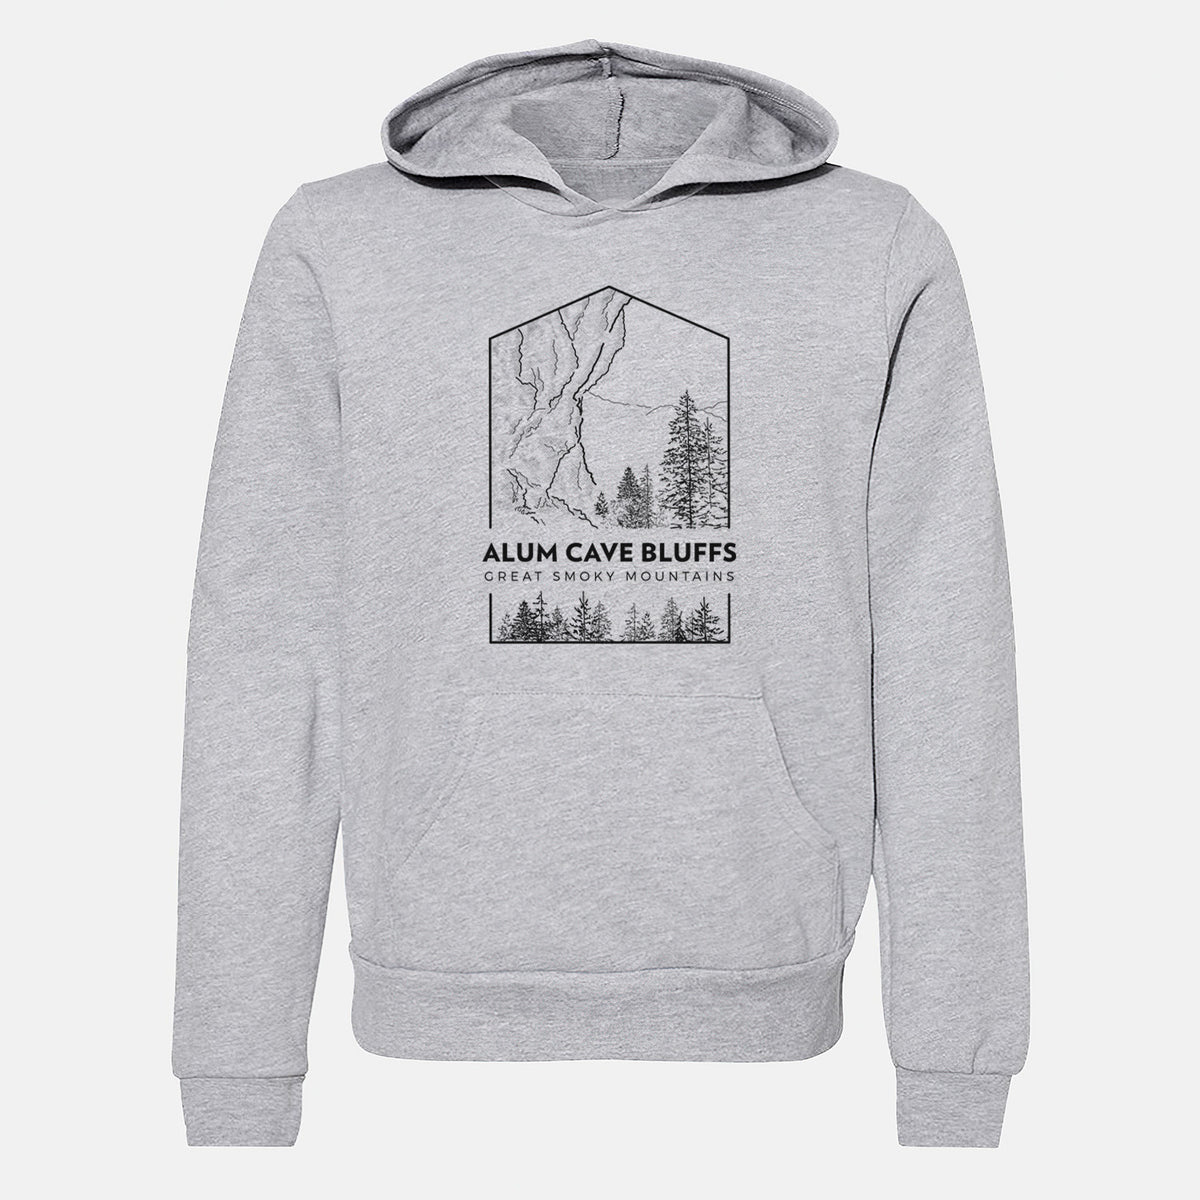 Alum Cave Bluffs - Great Smoky Mountains National Park - Youth Hoodie Sweatshirt